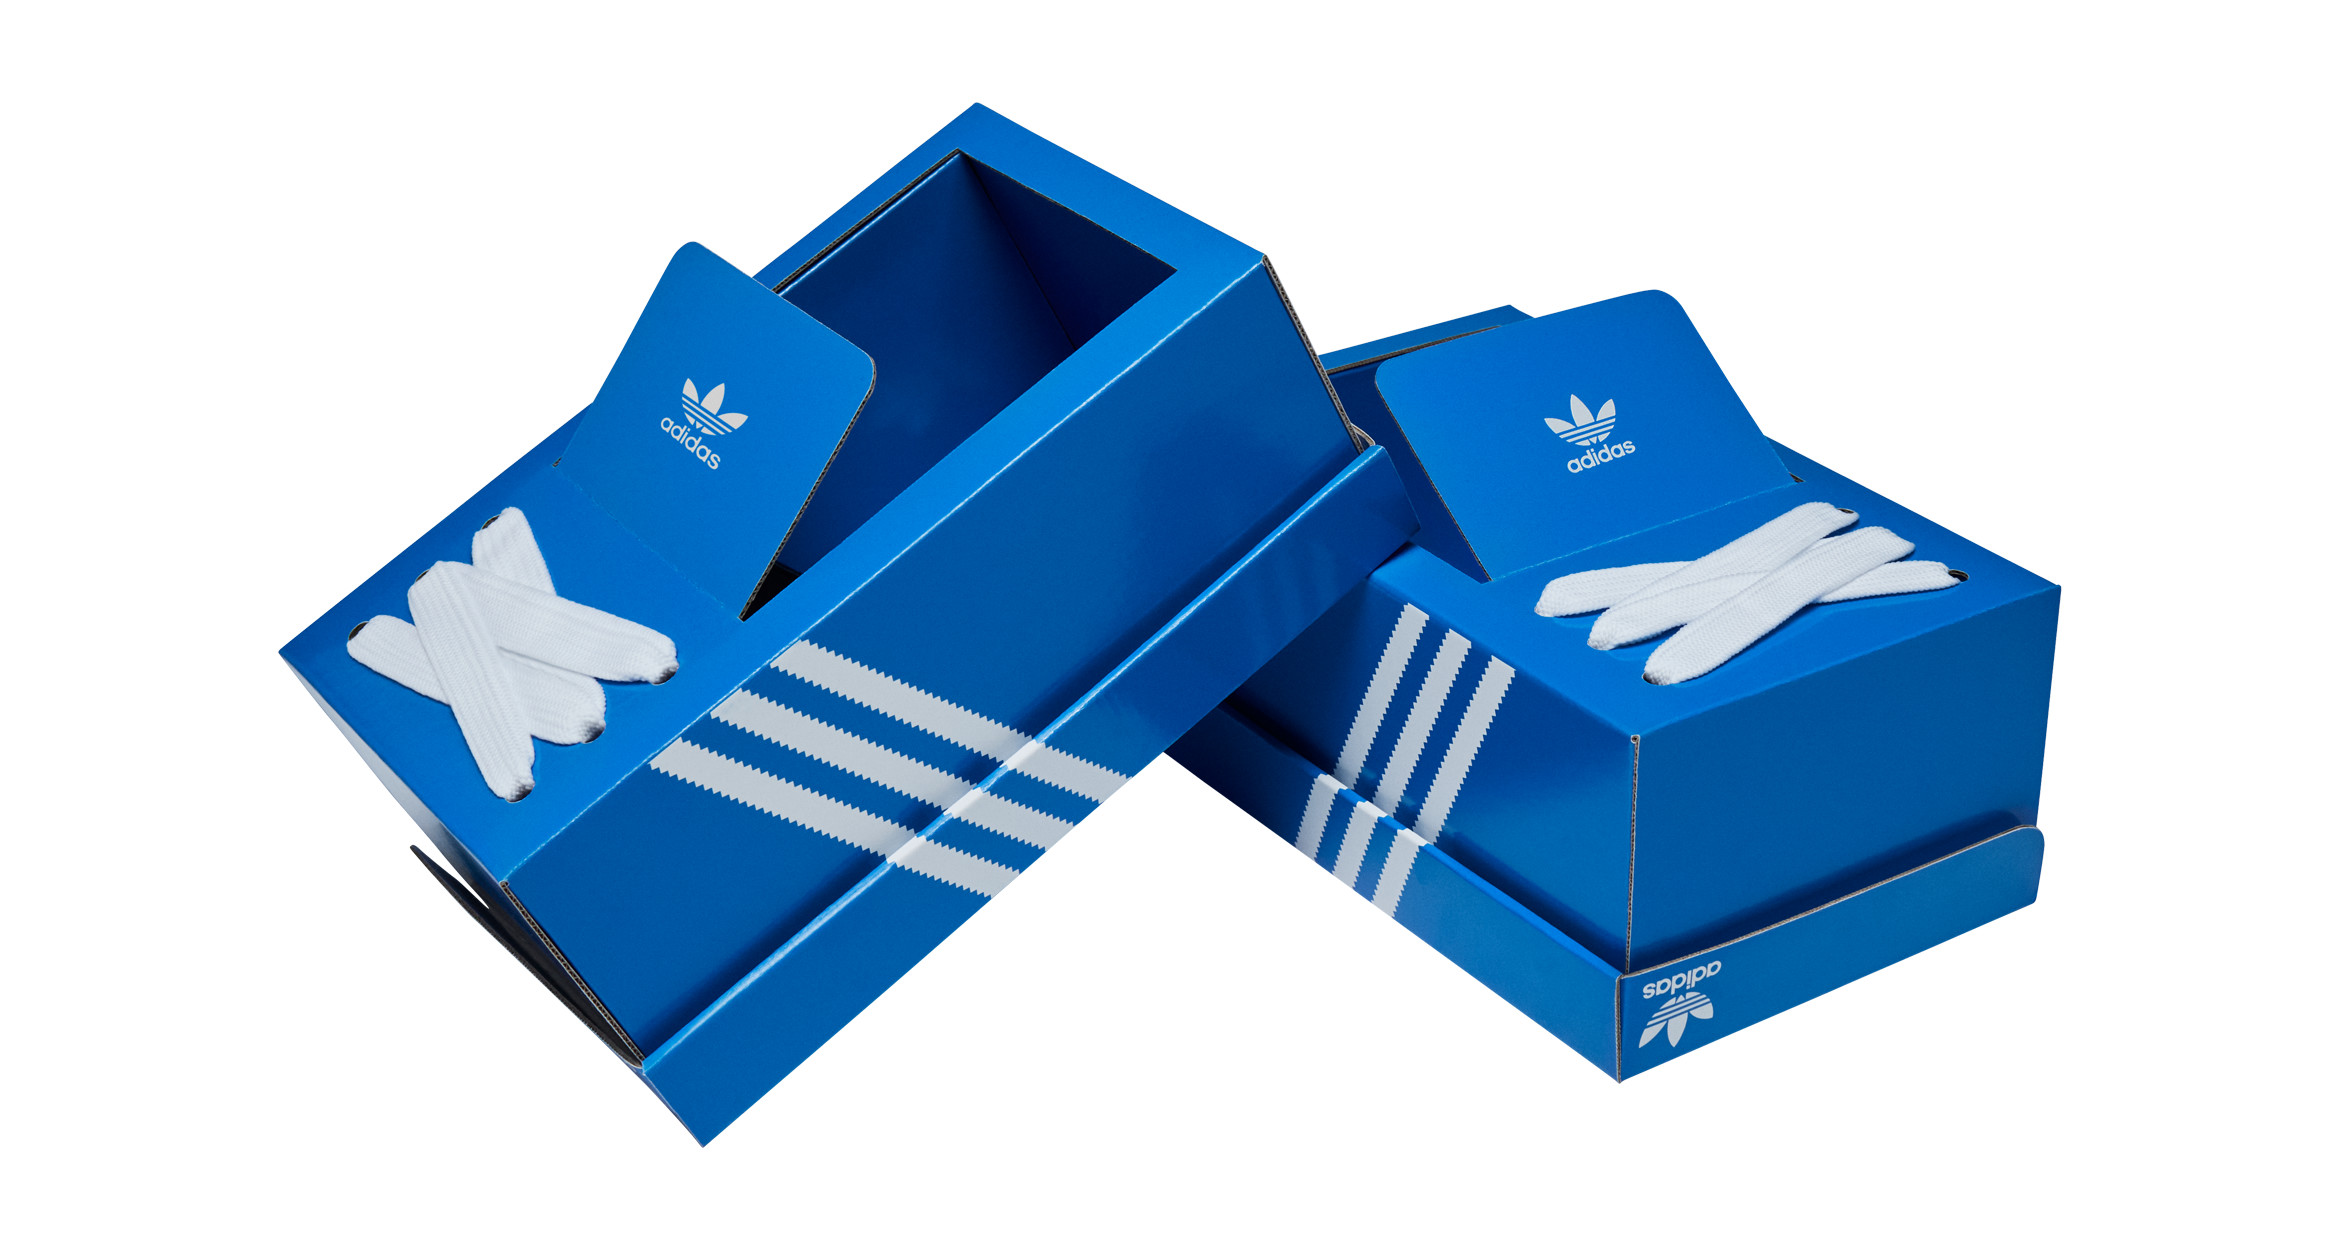 Adidas Think Outside the Box for Chunkiest Shoe Yet Inspired by Classic Shoe Box